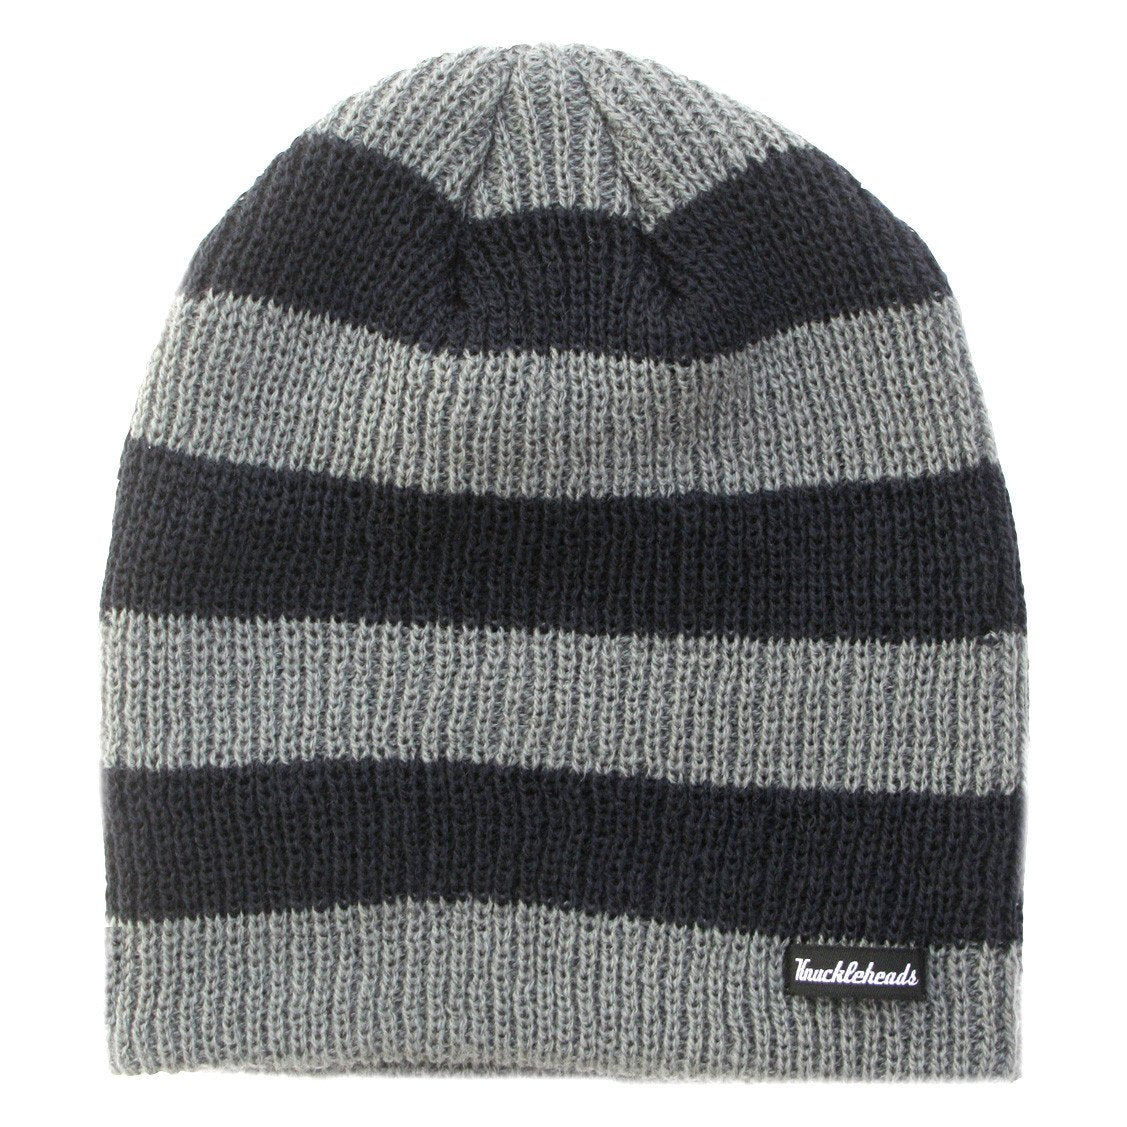 Black and Grey Stripes Slouchy Beanie  - Doodlebug's Children's Boutique